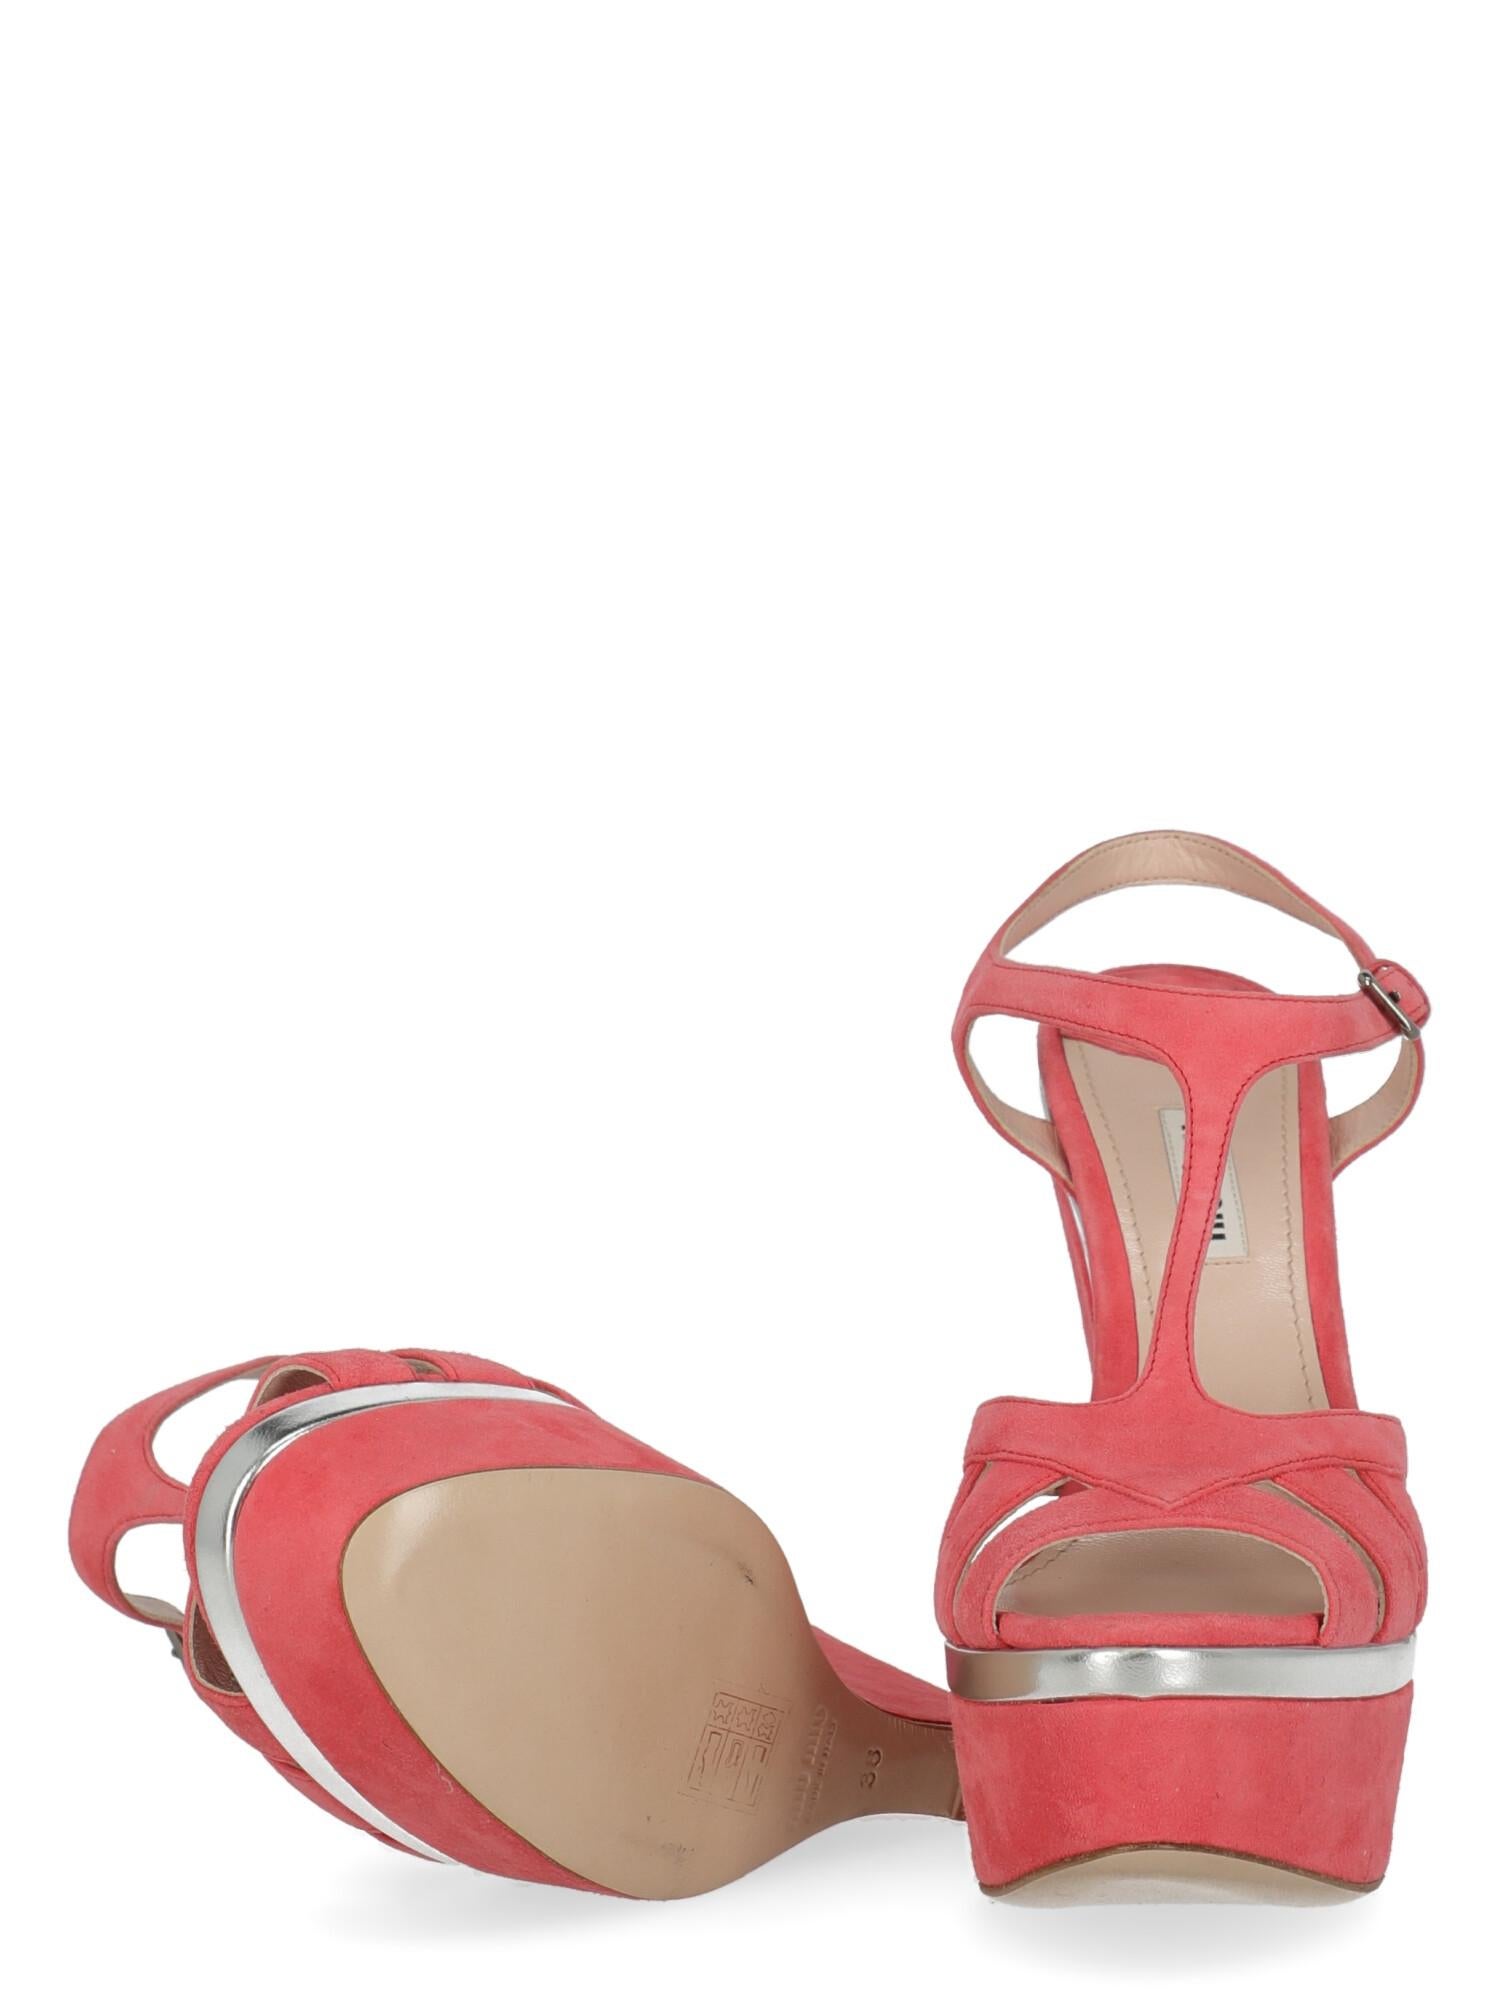 Miu Miu  Women   Wedges  Pink Leather EU 38 In Good Condition For Sale In Milan, IT